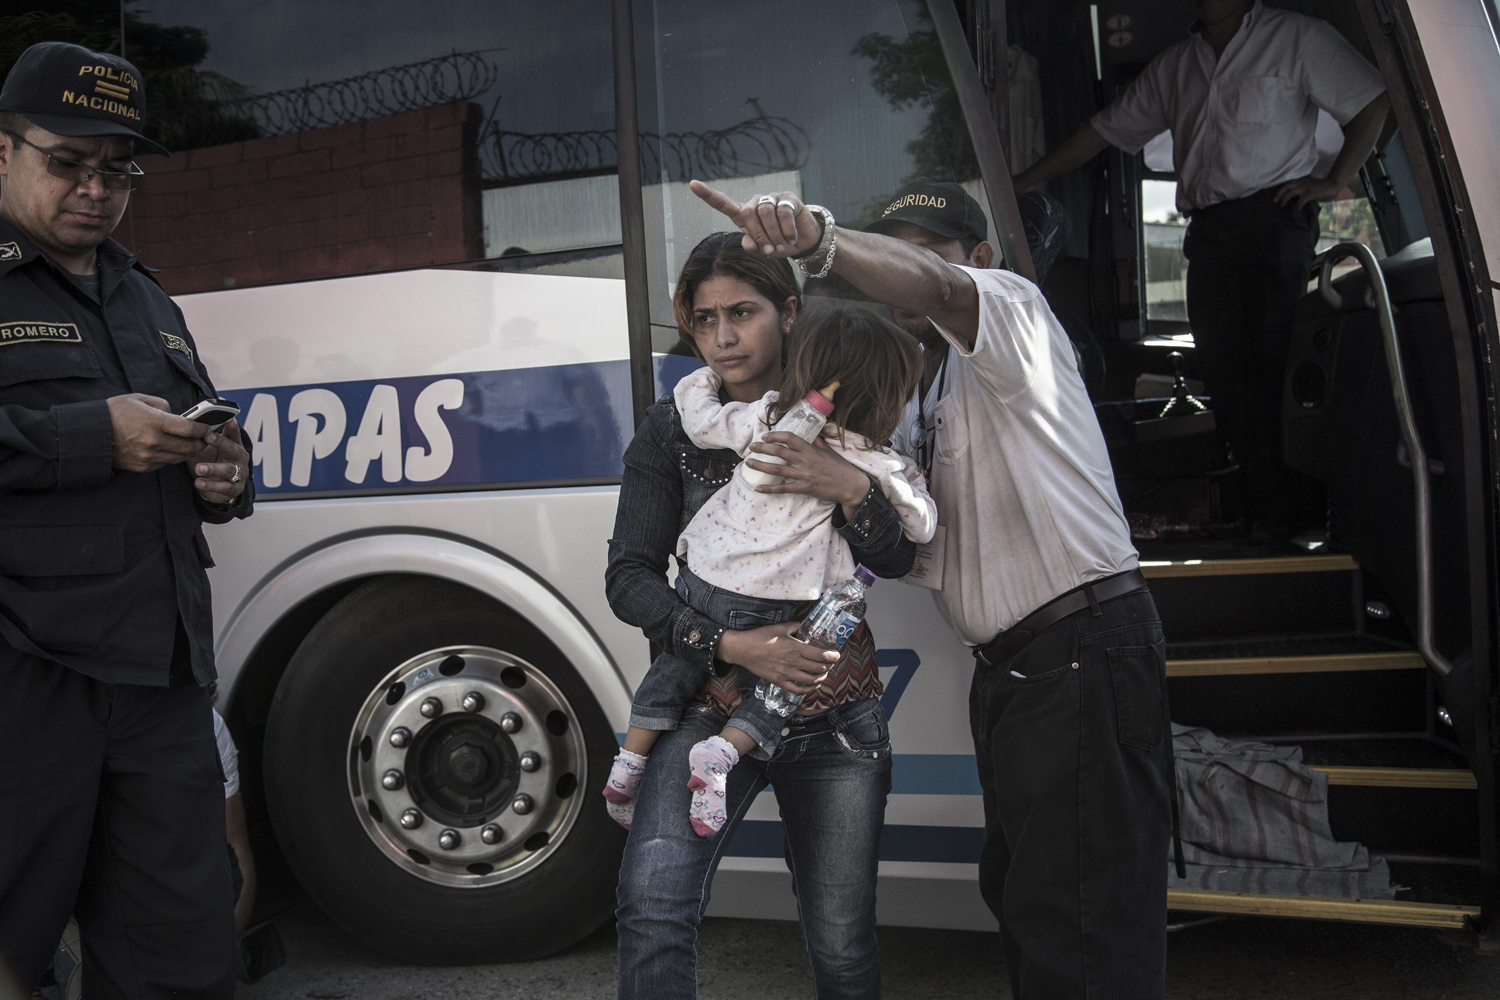 Bus loads of young mothers, children and unaccompanied minors arrive to a return center for deported migrants run by the Honduran Institute of Children and Family (INFHA), most having been deported from Mexico on their journey to the U.S.-Mexico border. San Pedro Sula, Honduras. July 17, 2014.